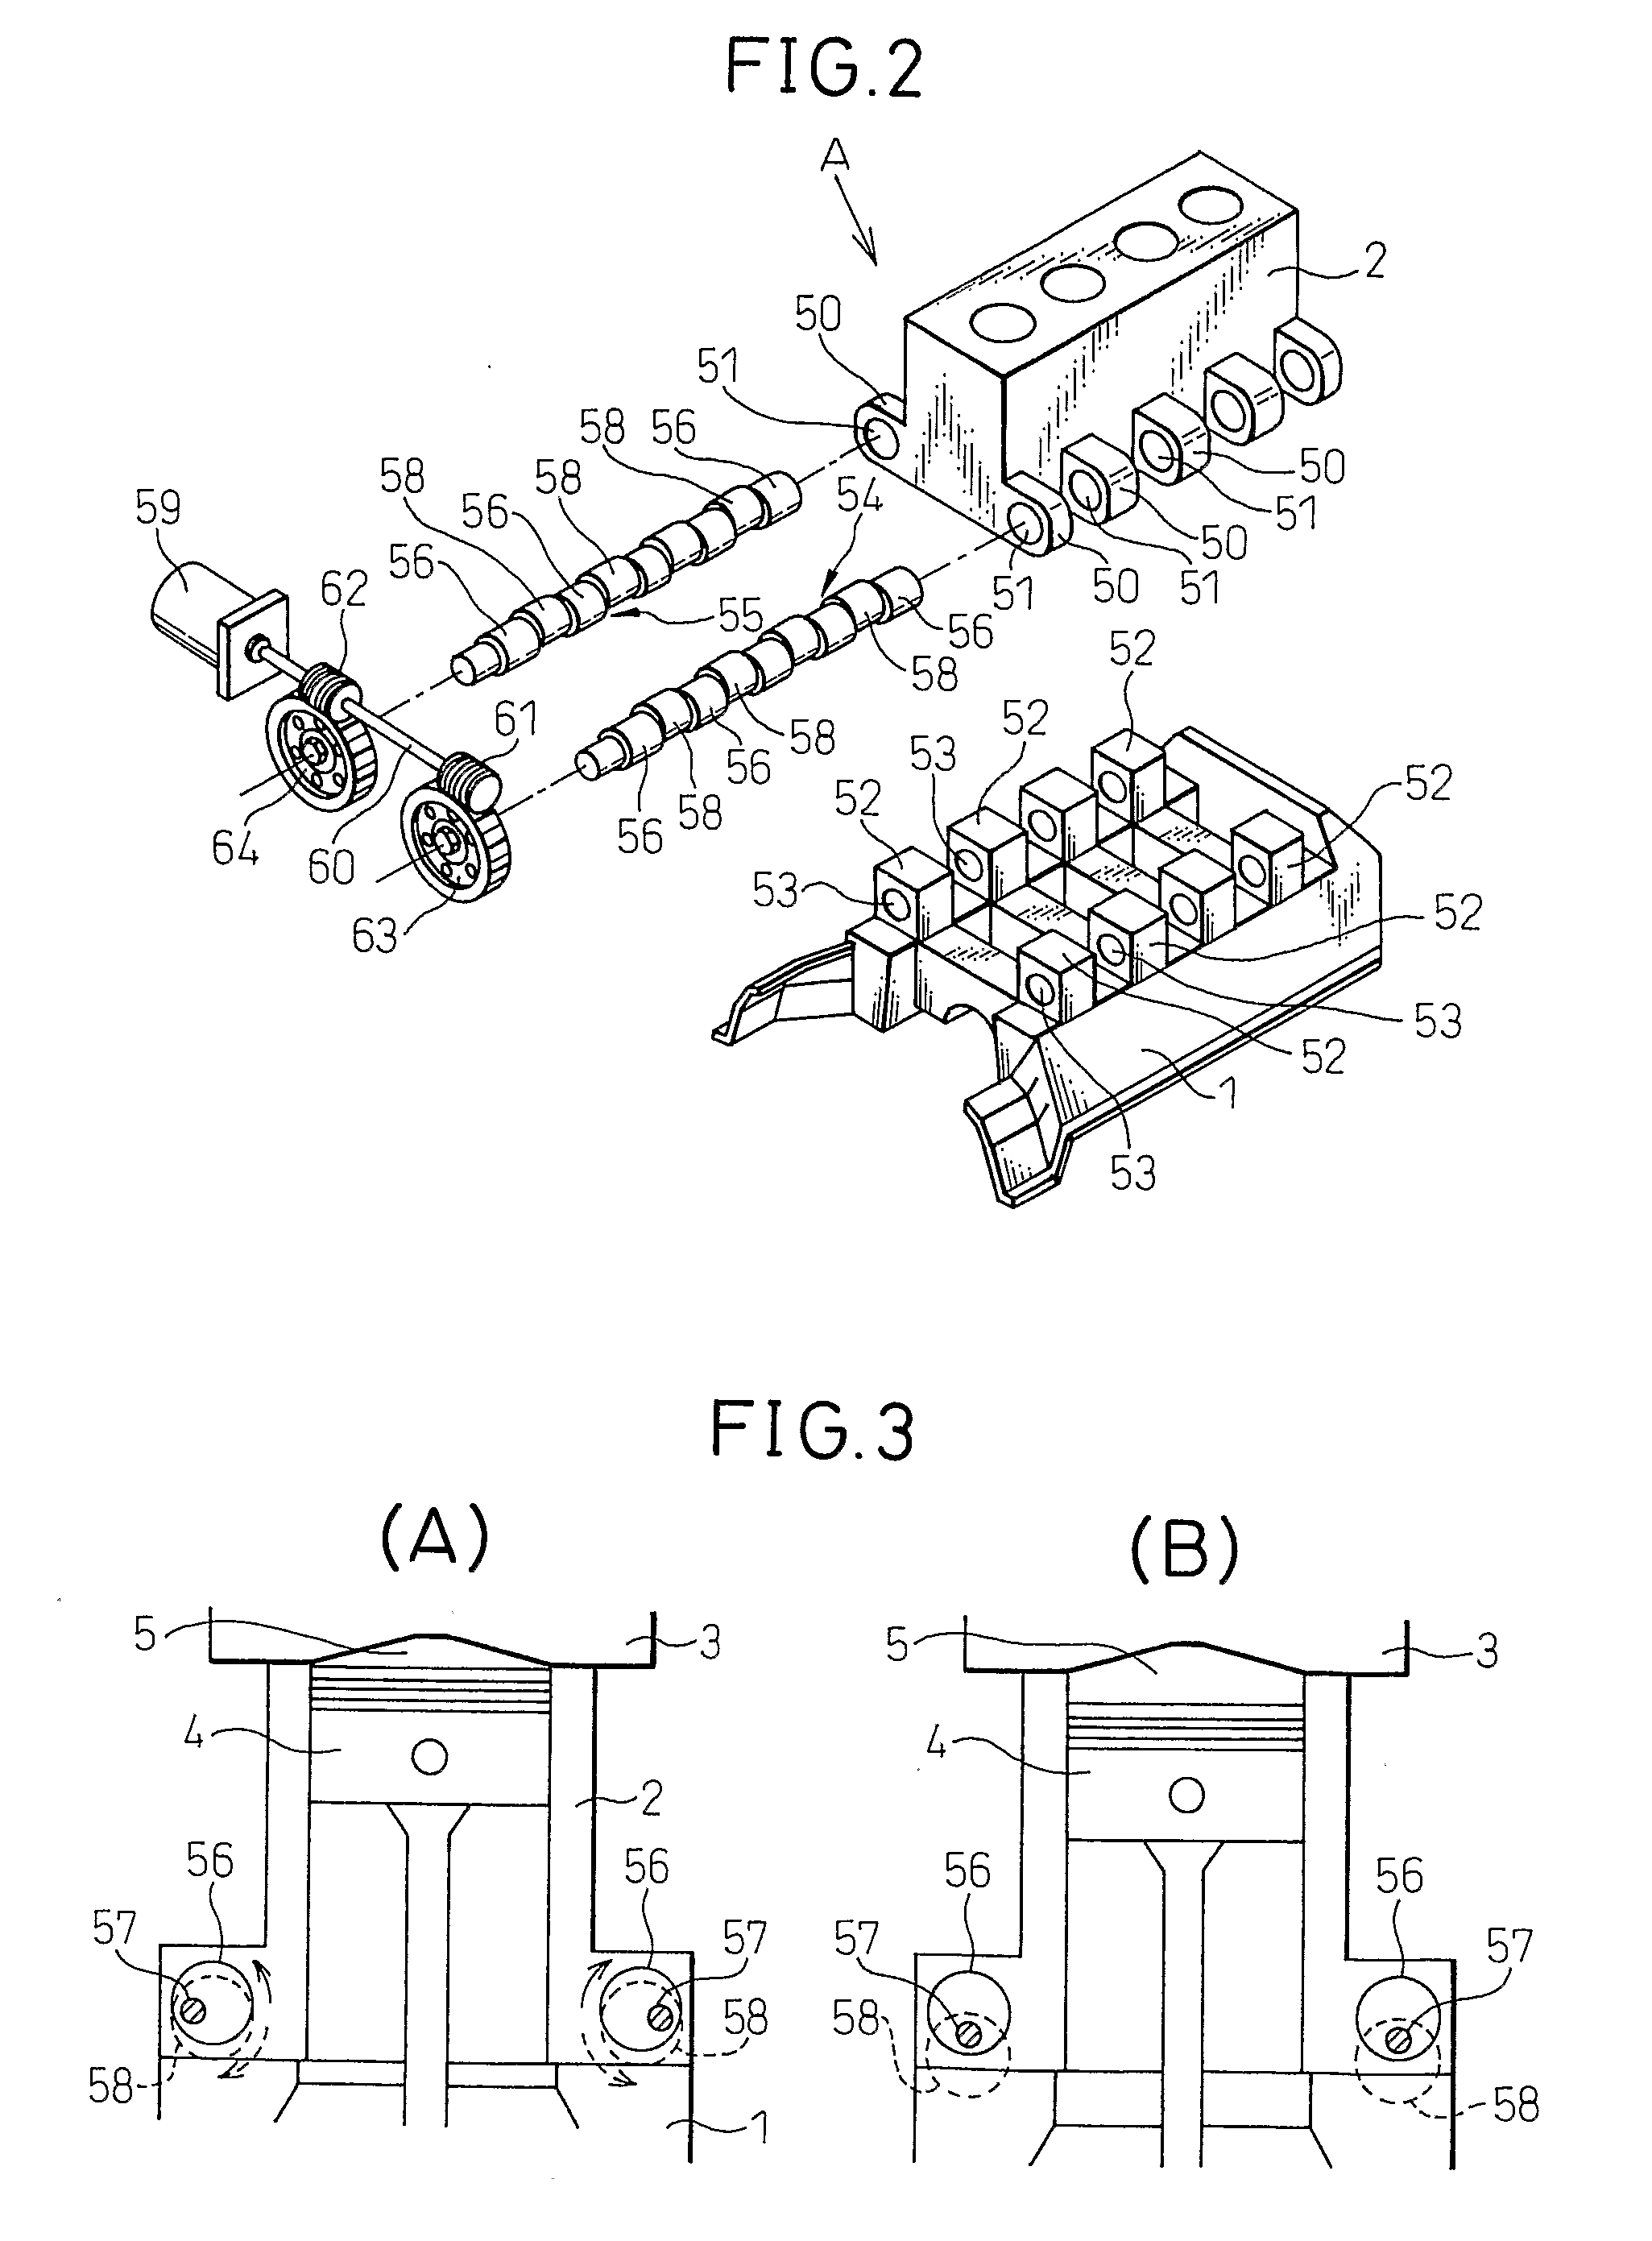 Method of Controlling a Mechanical Compression Ratio and a Start Timing of an Actual Compression Action